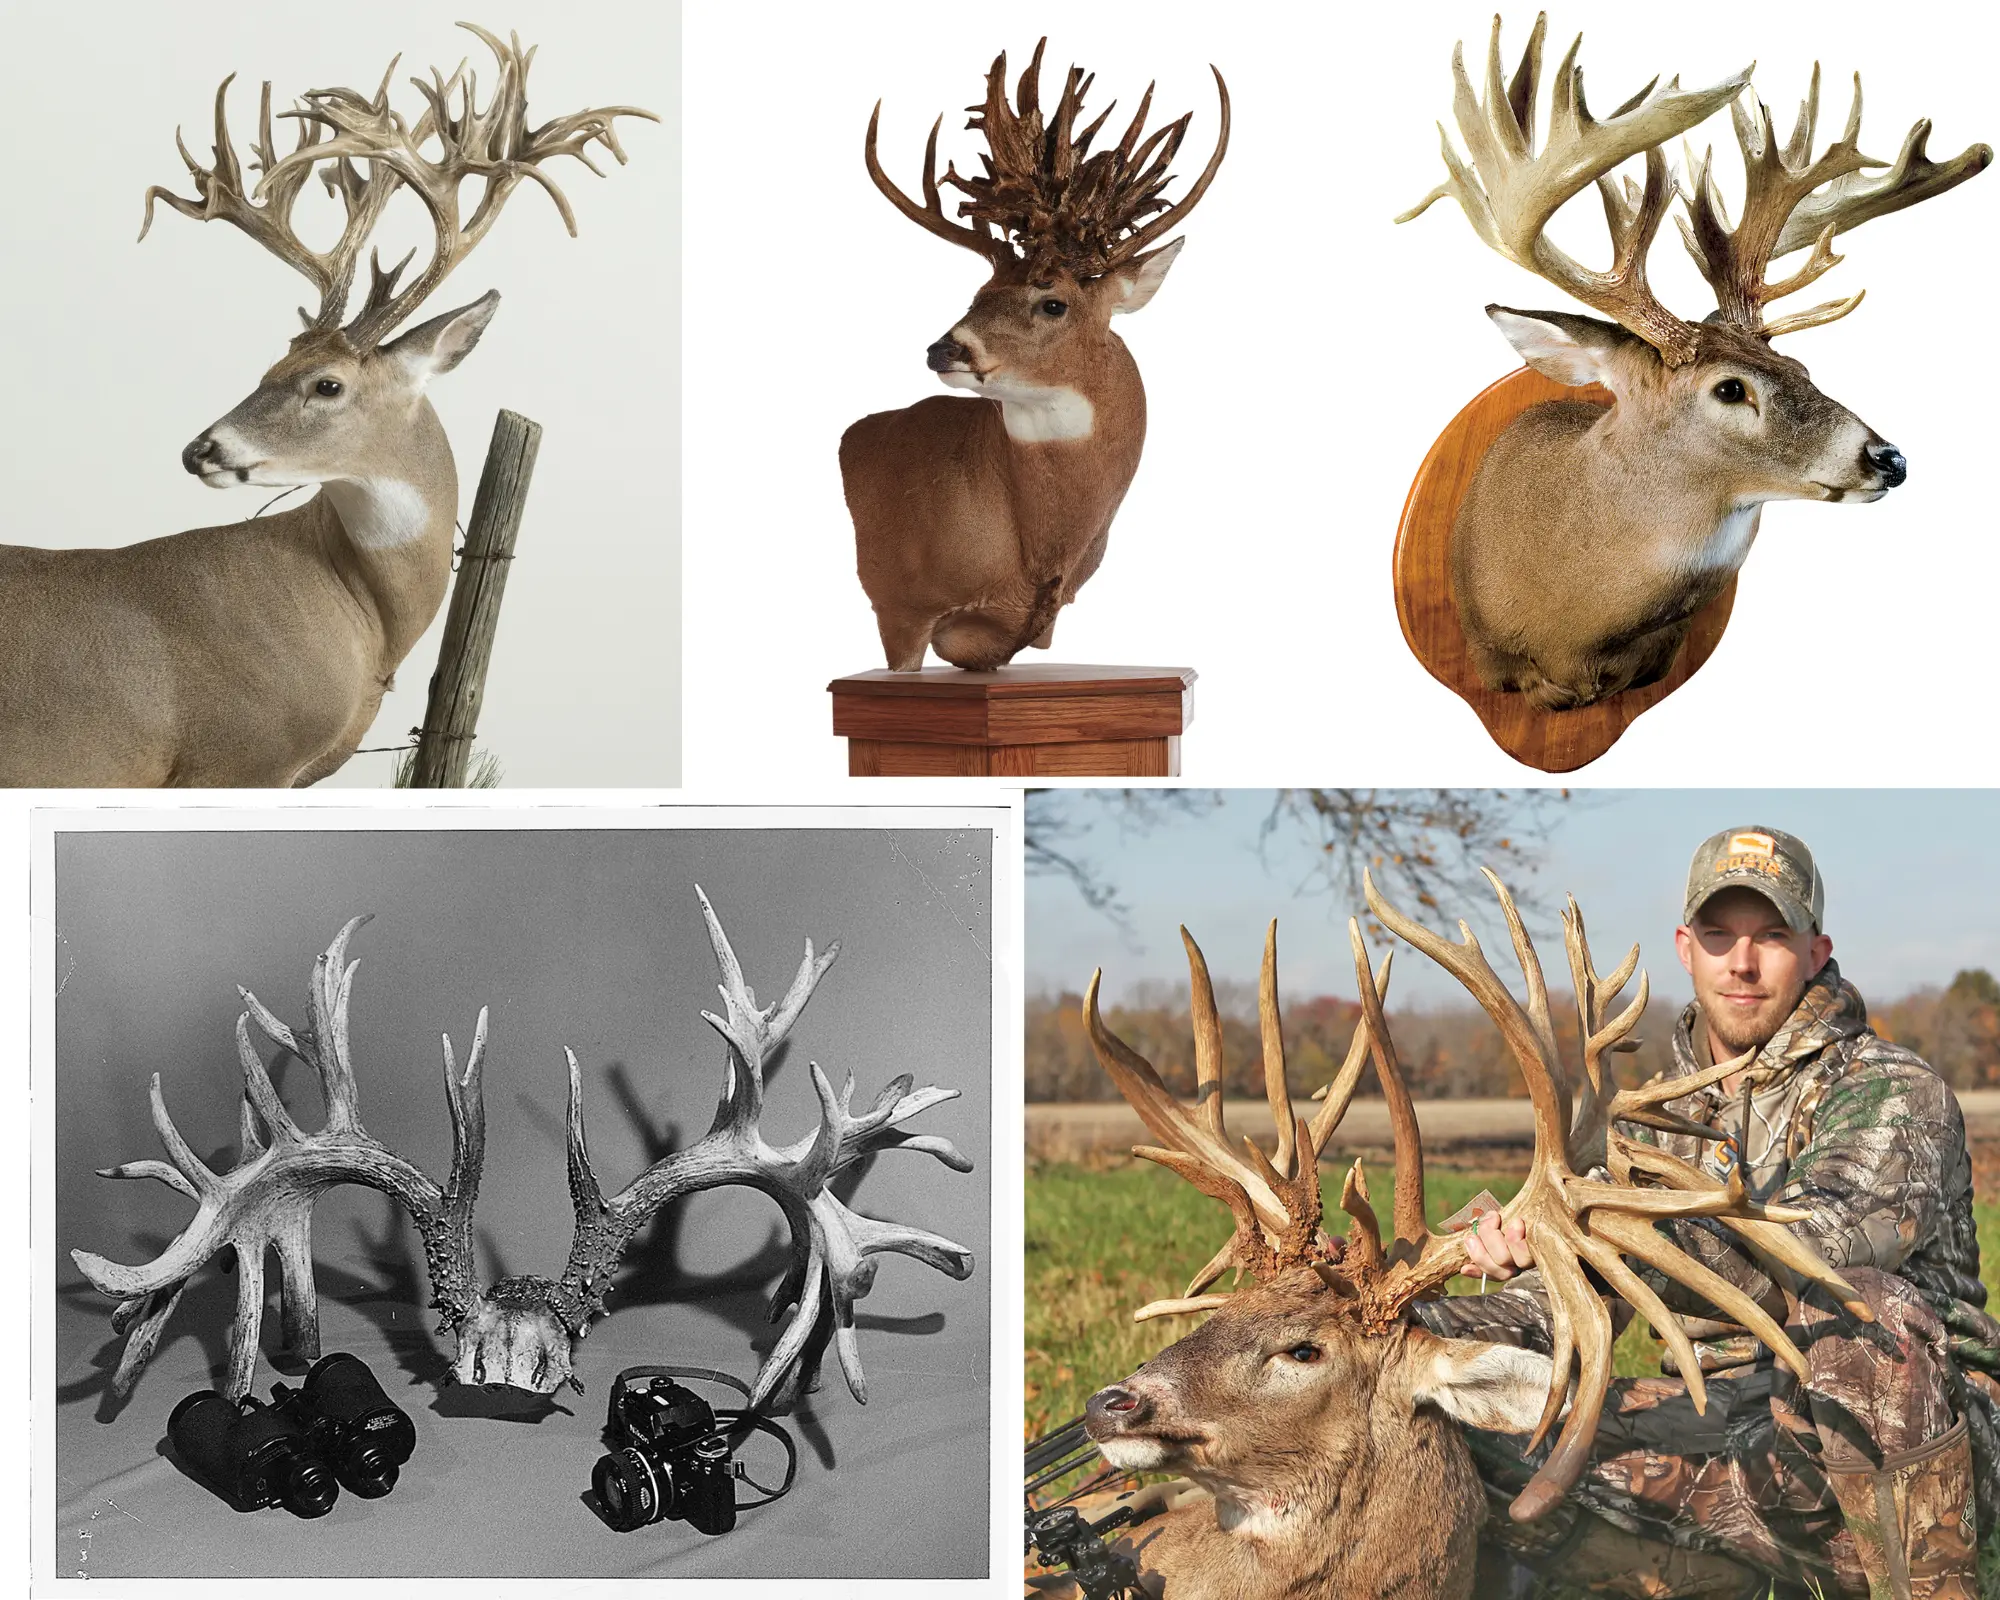 The Stories Behind the Biggest Typical Whitetail Deer